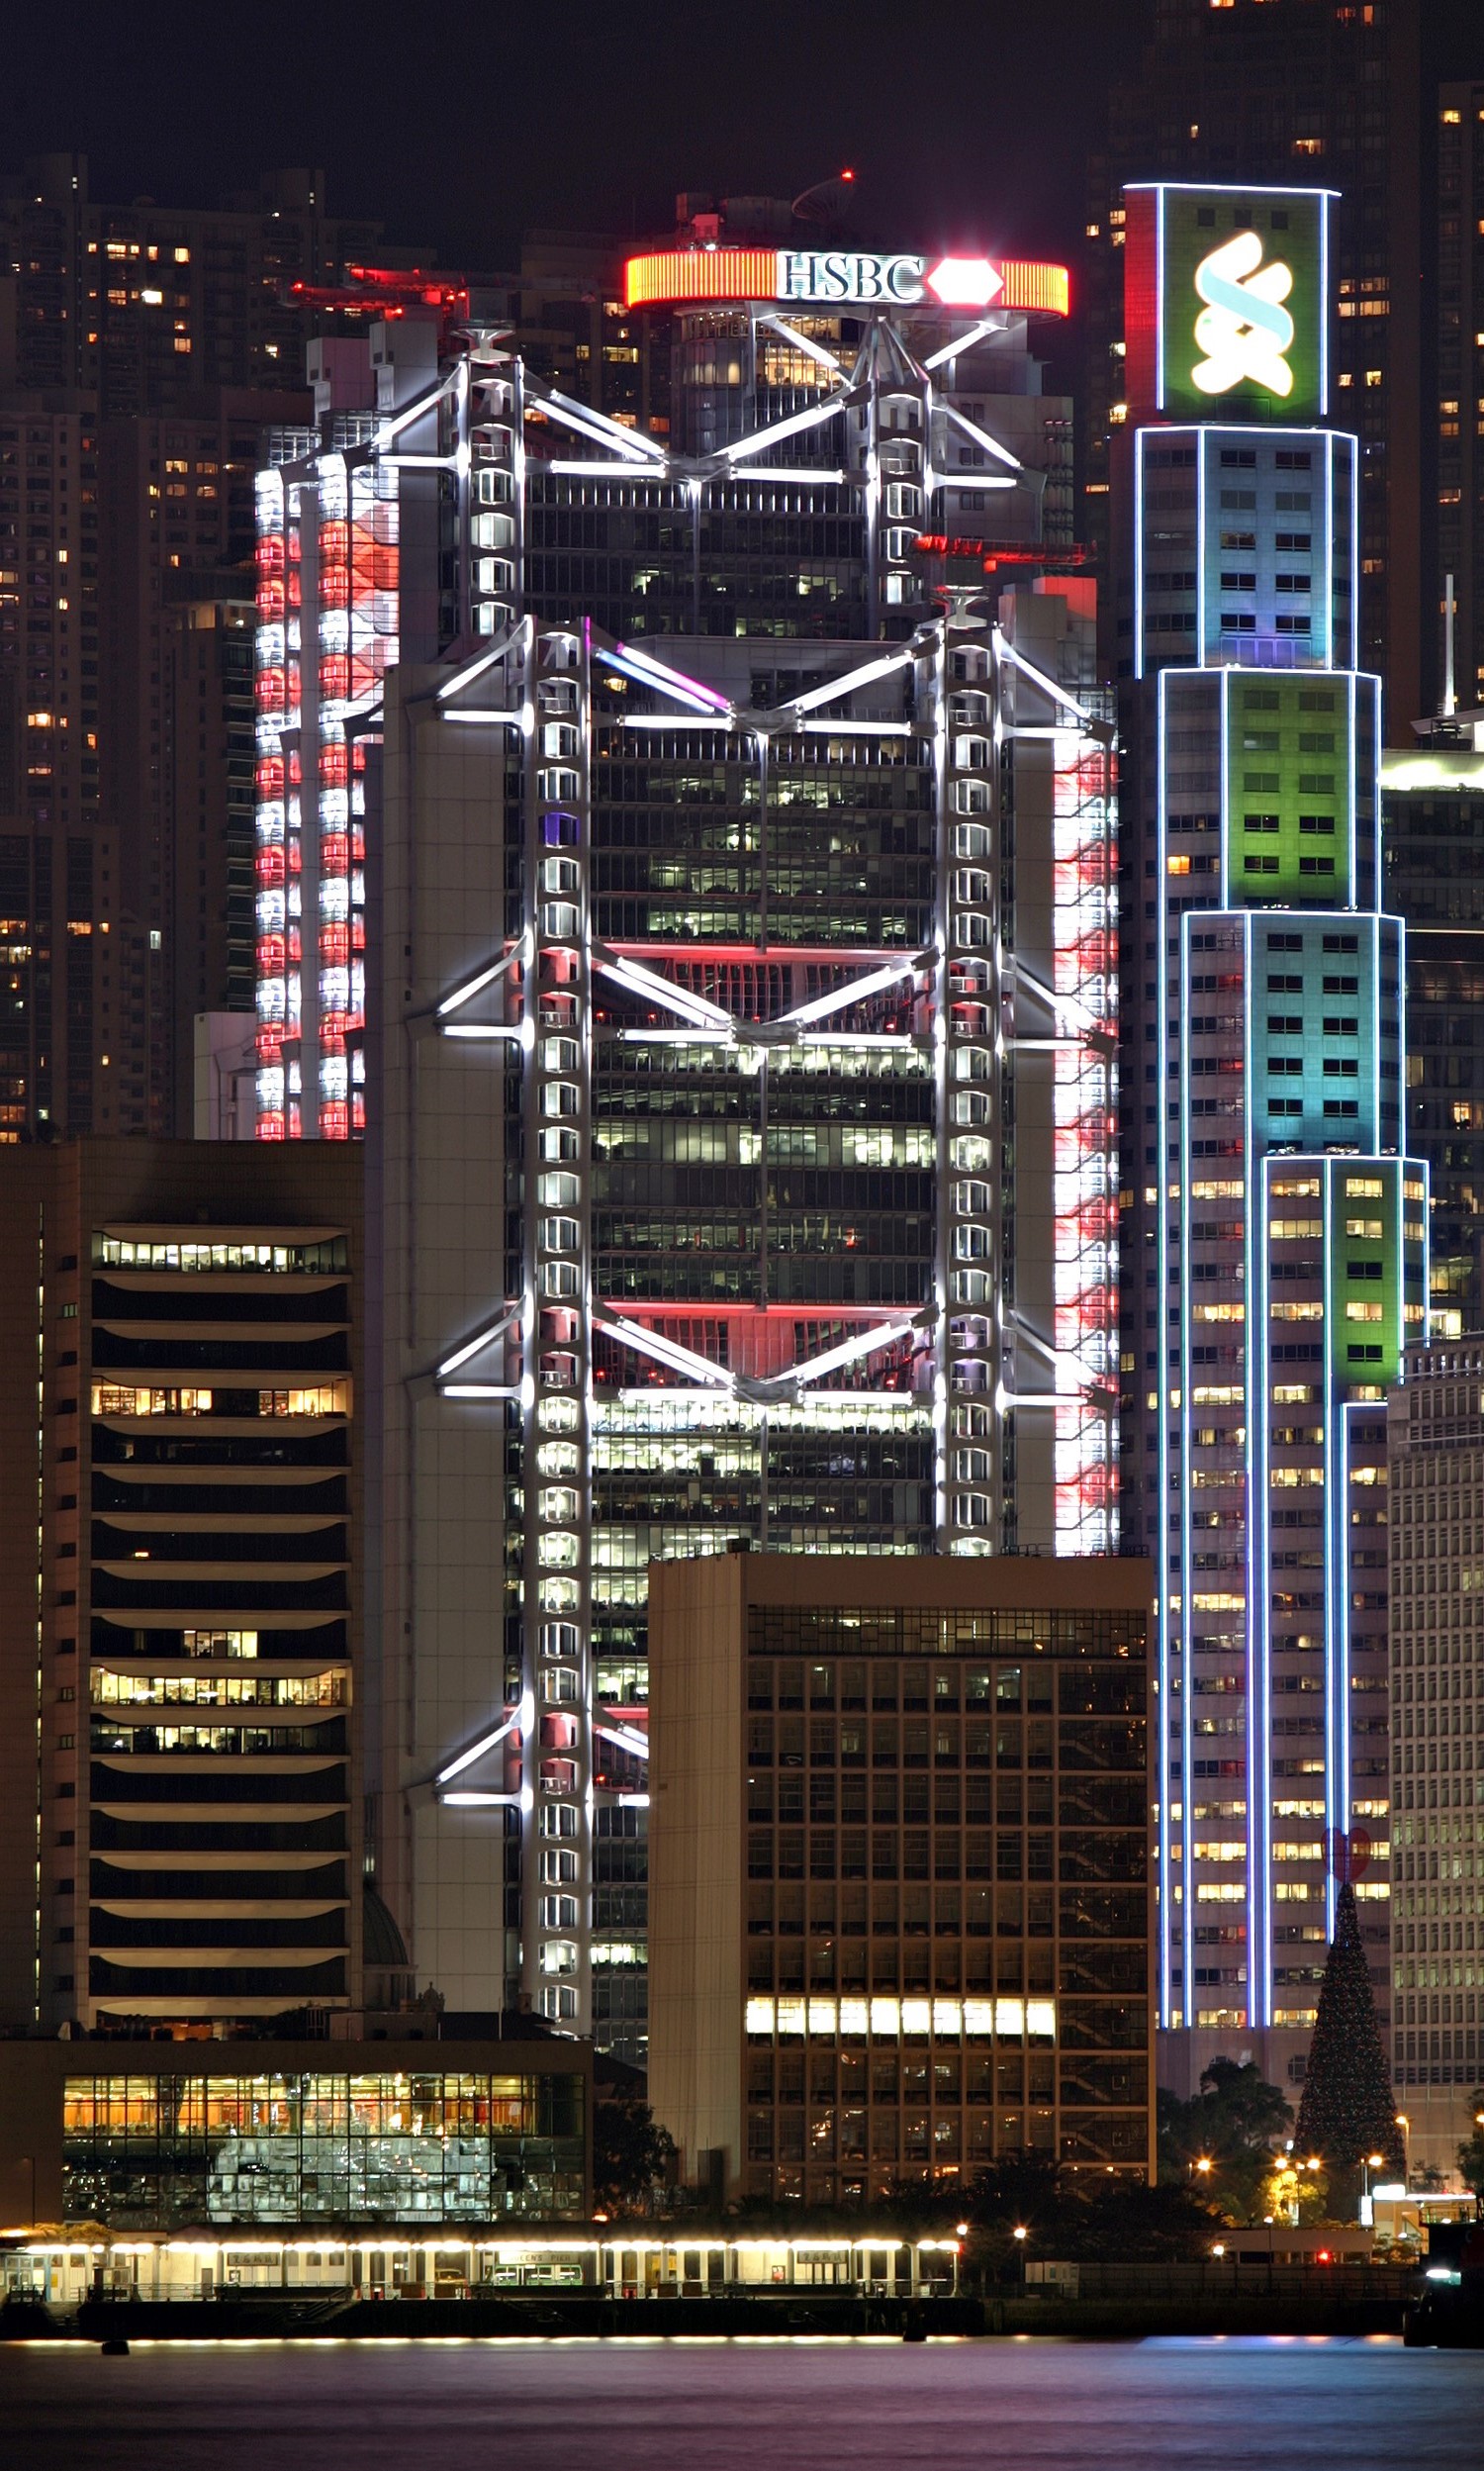 HSBC Headquarters - Night view from Kowloon 